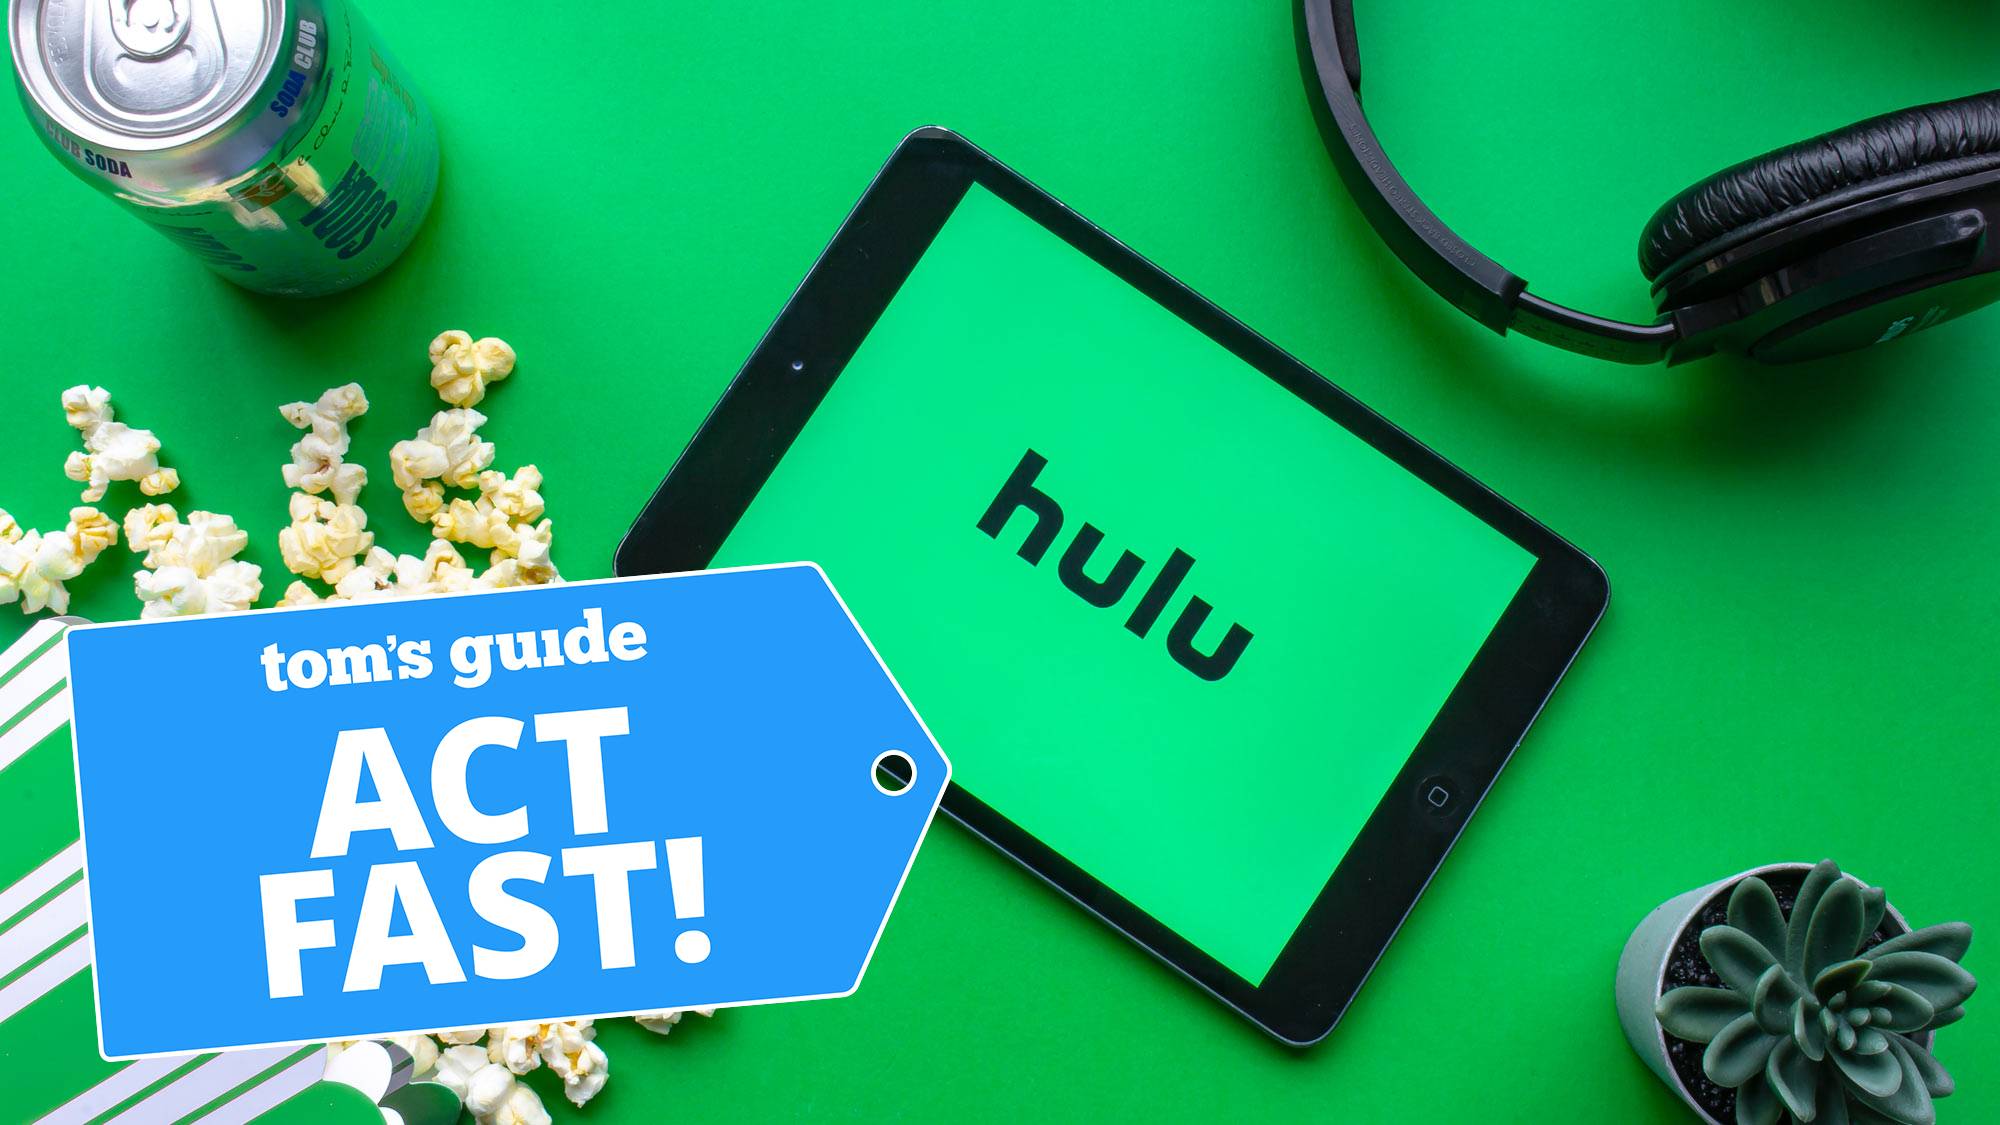 Hulu Streaming Day deal drops price to 1 — here's how to get it Tom